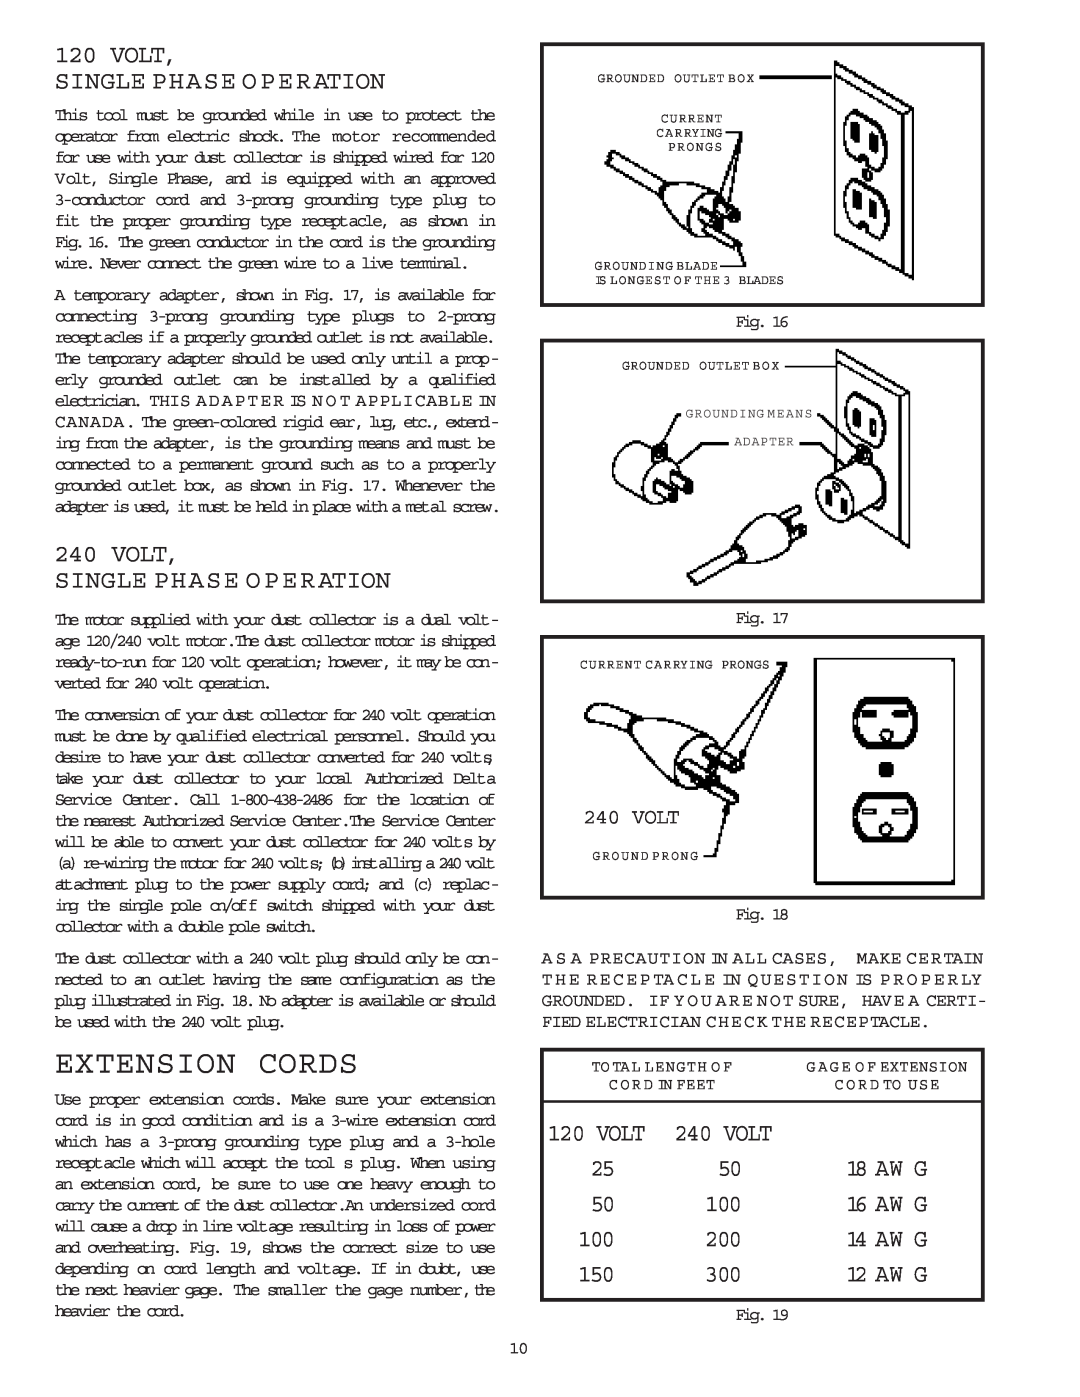 Delta 50-840 instruction manual Extension Cords, Volt Single Phase Operation 